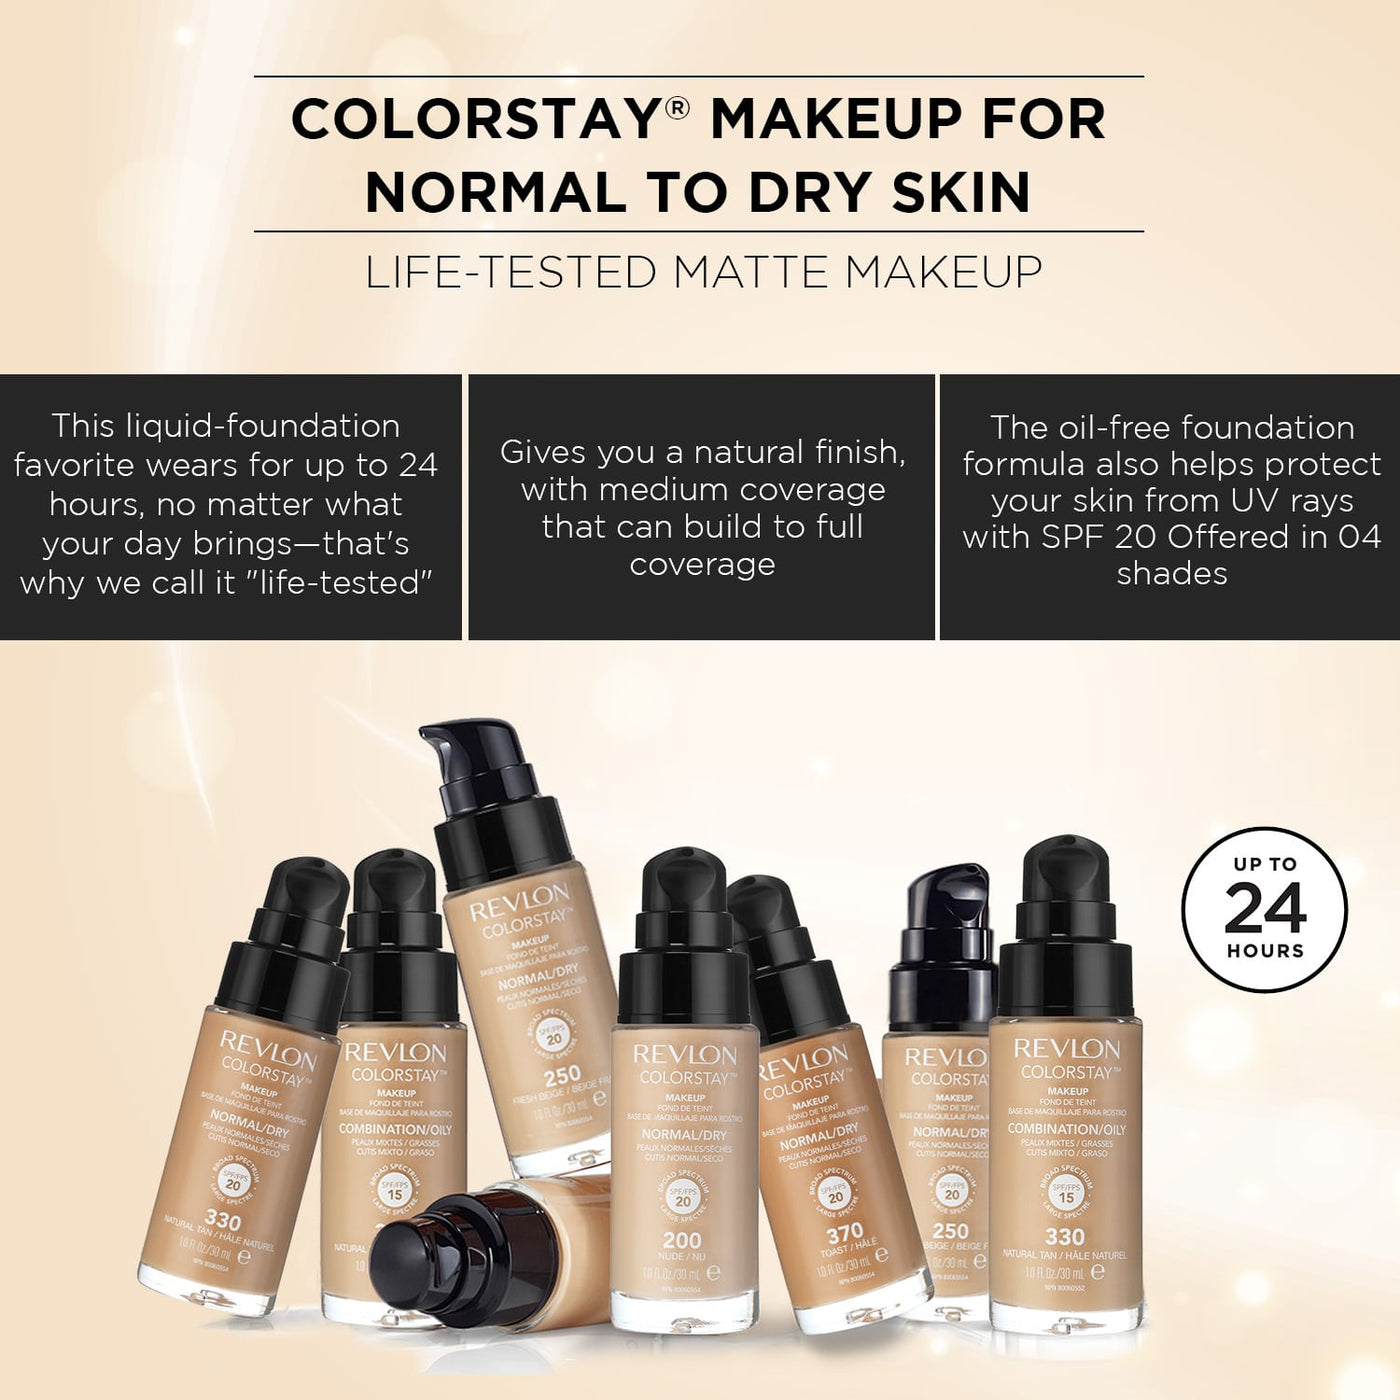 Revlon ColorStay Makeup for Oily to Combination Skin SPF 15